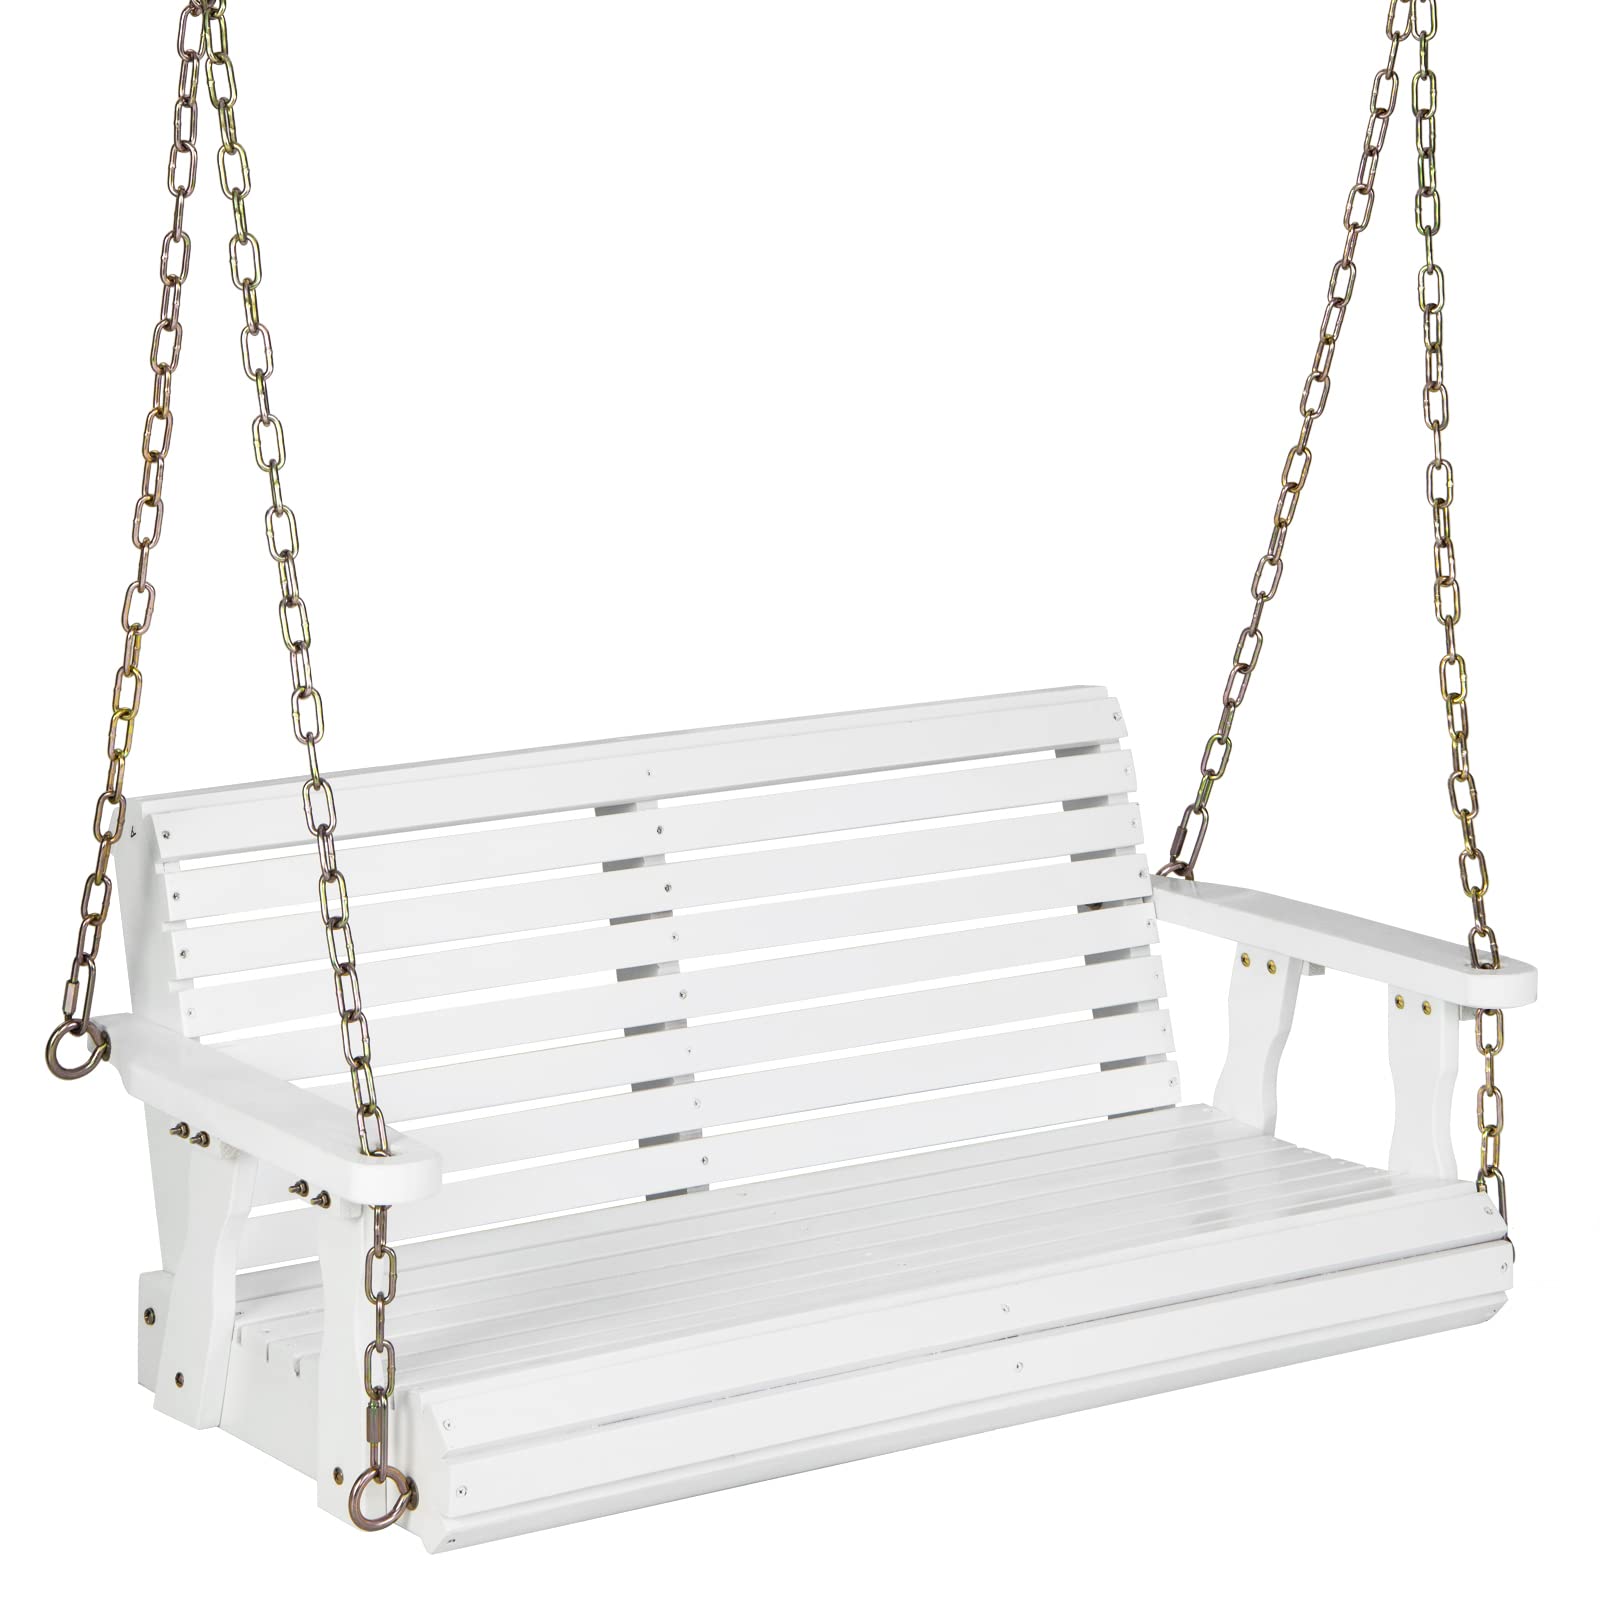 Giantex Wooden Porch Swing 2 Seat - Outdoor Swinging Chairs